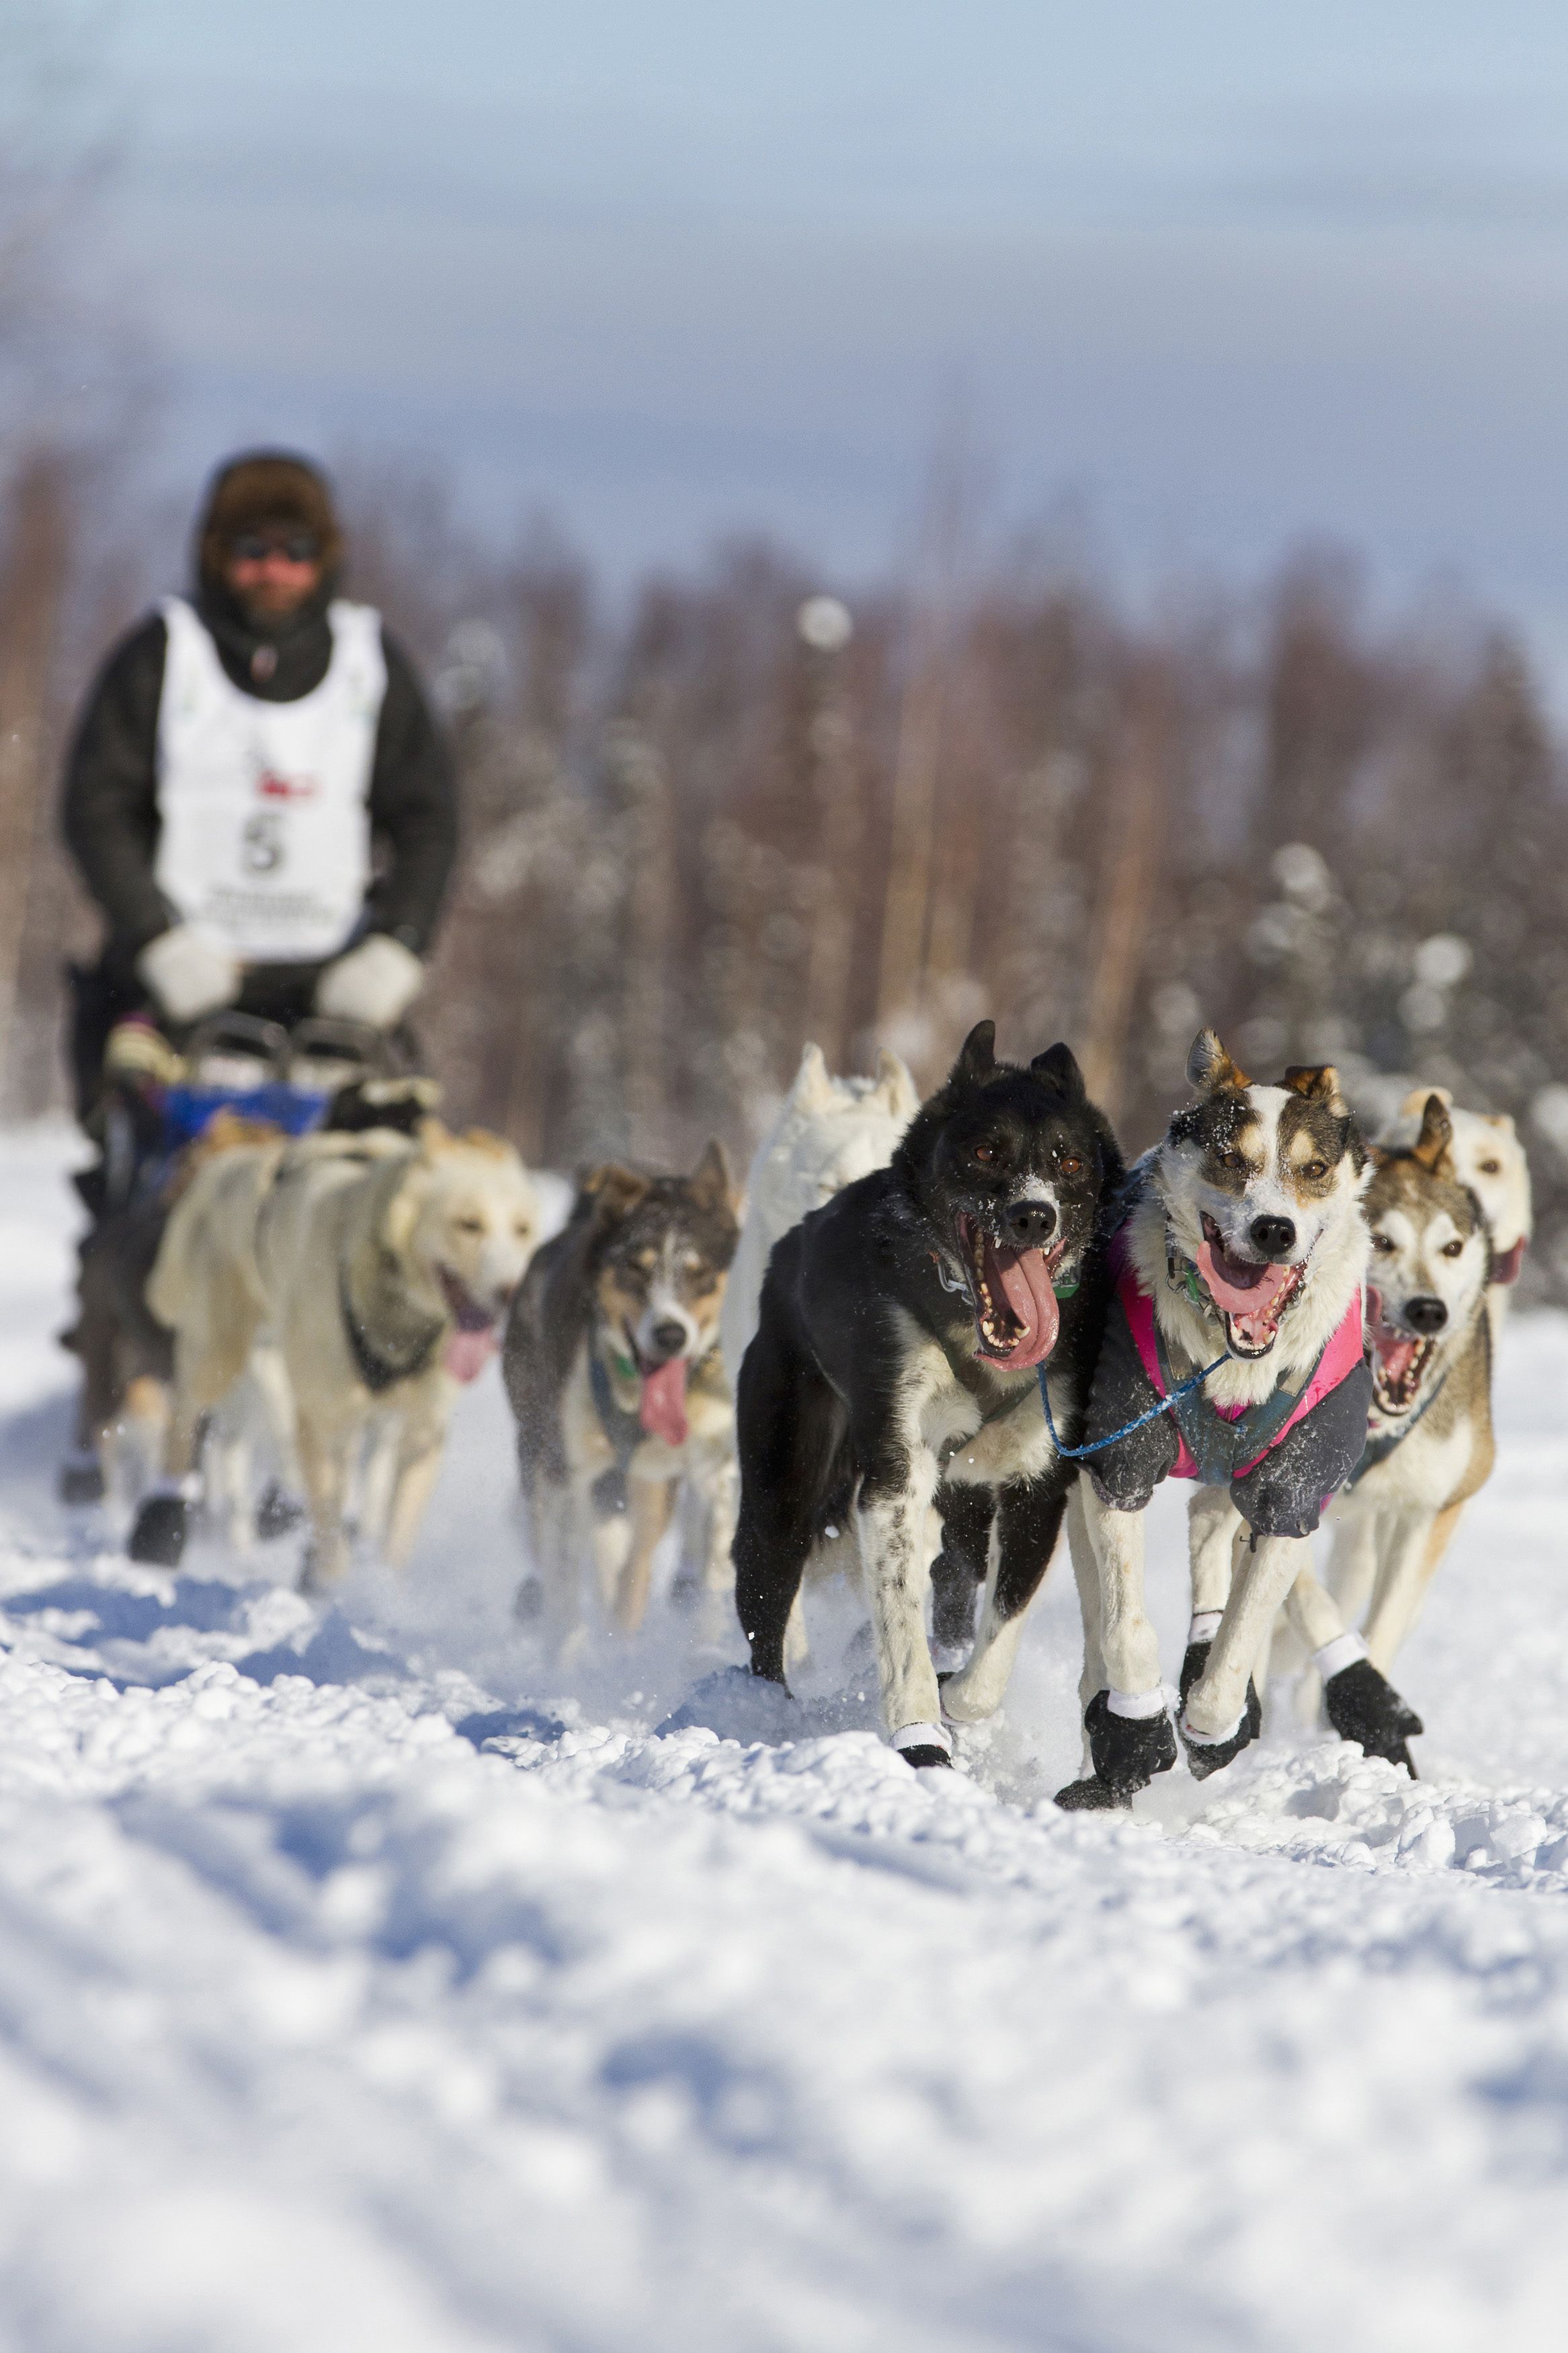 Tom Thurston, a musher in the 40th Iditarod